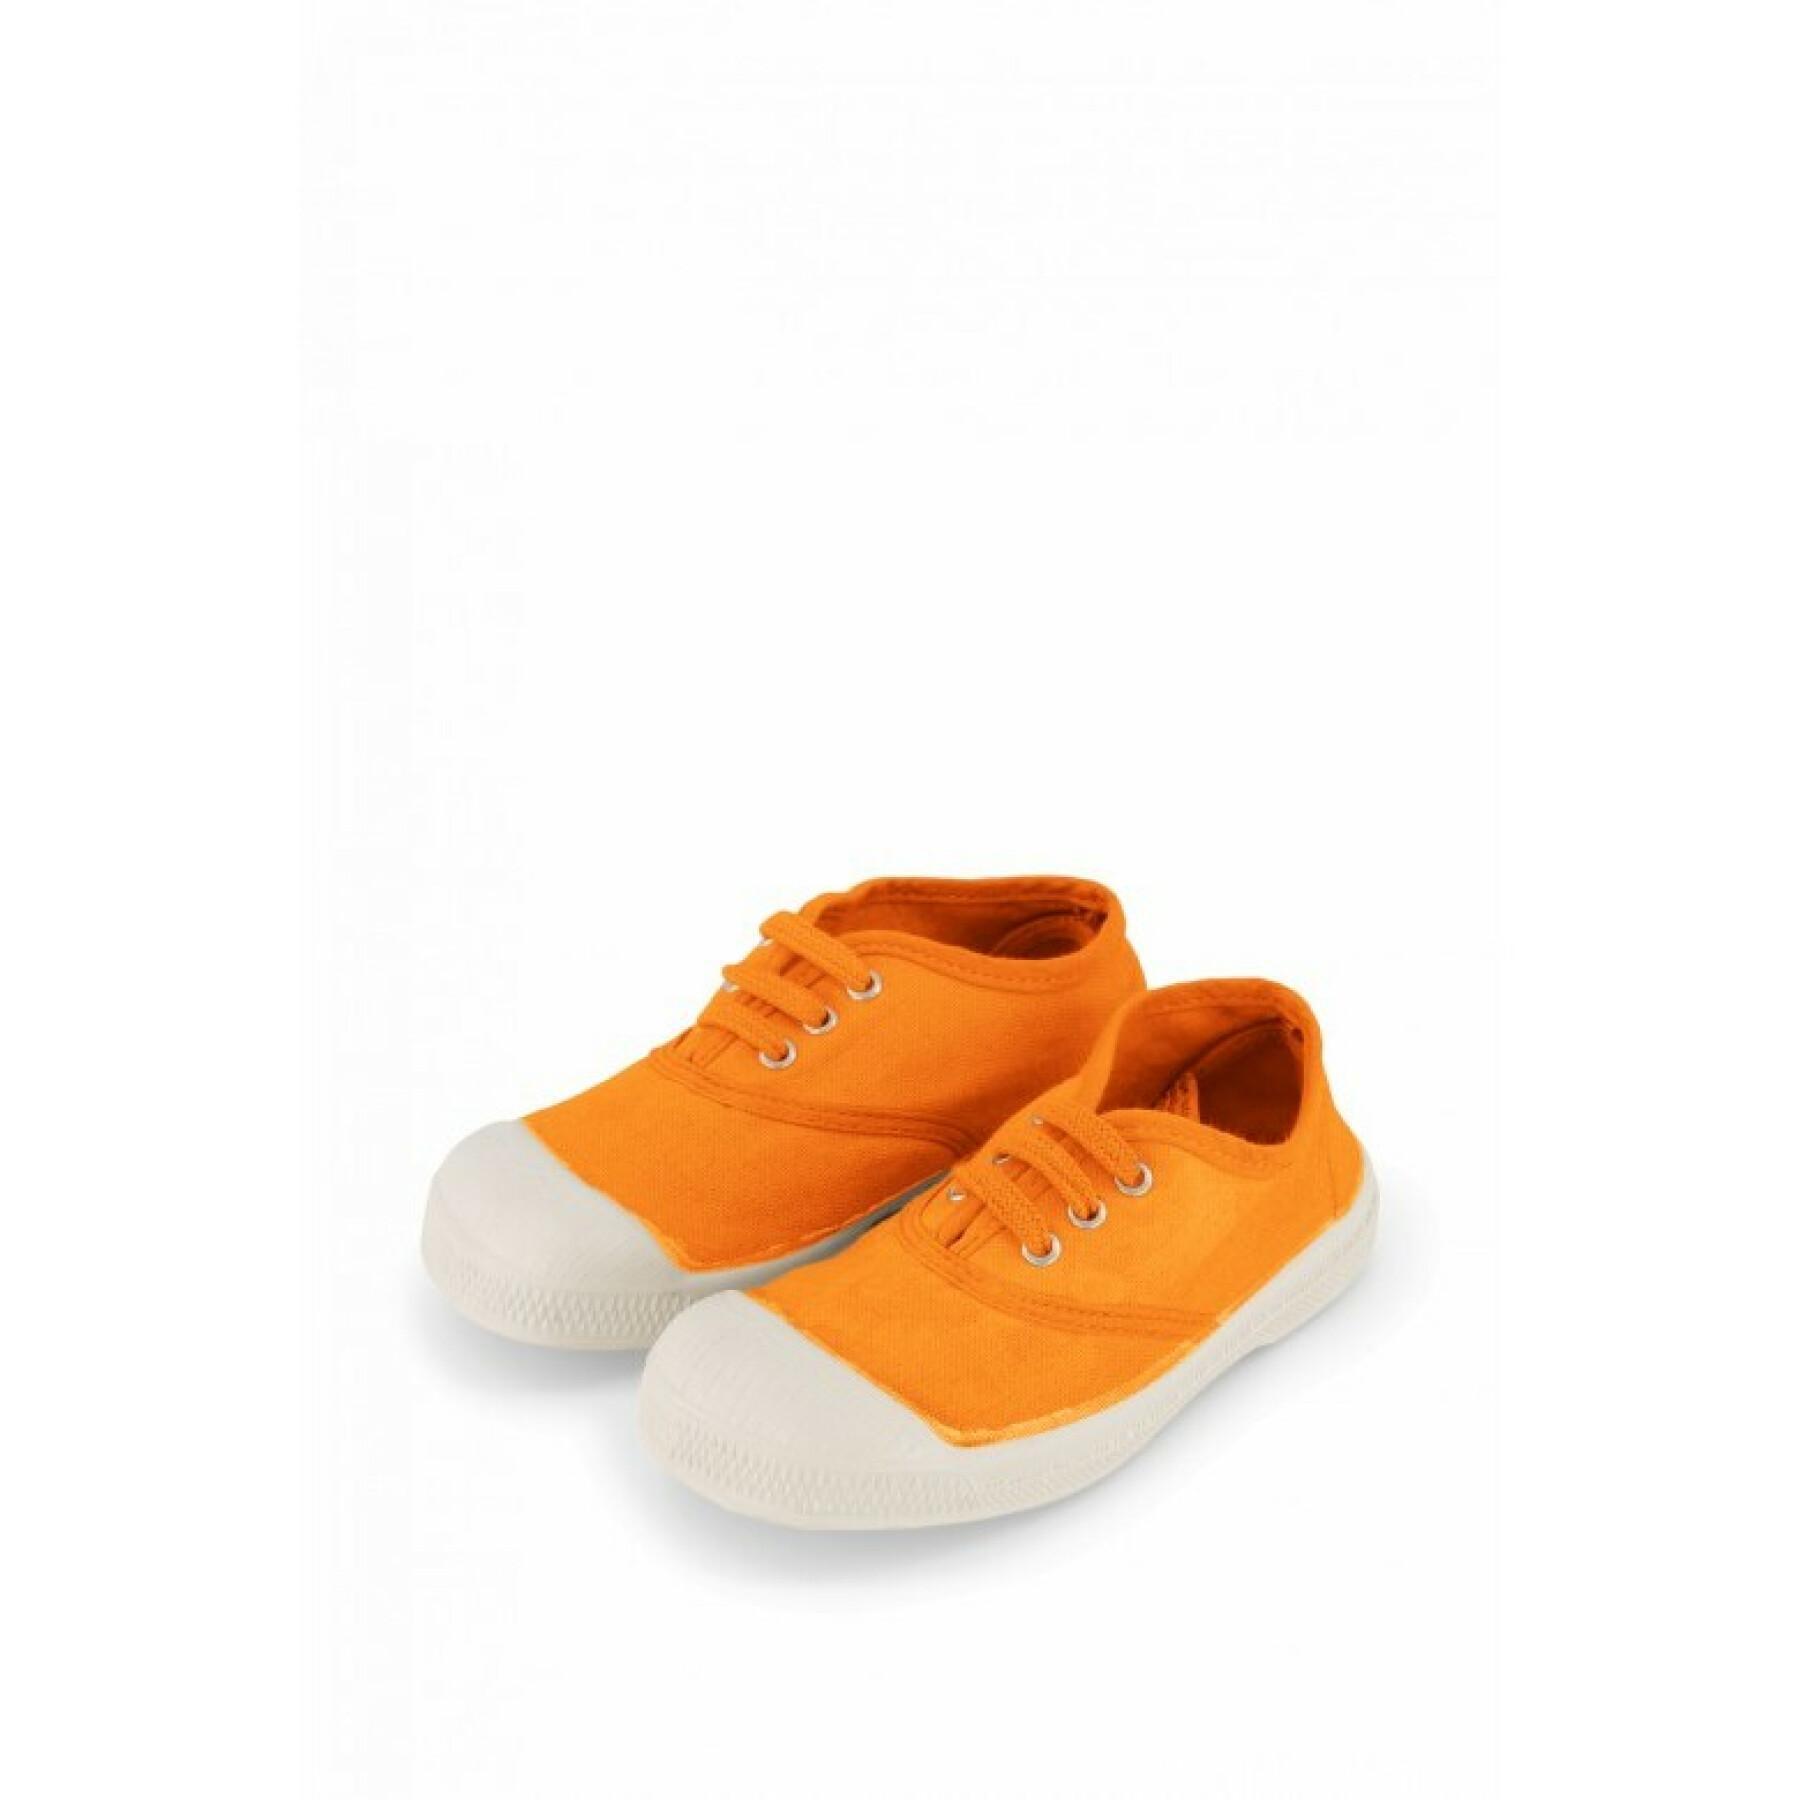 Children's lace-up sneakers Bensimon tennis